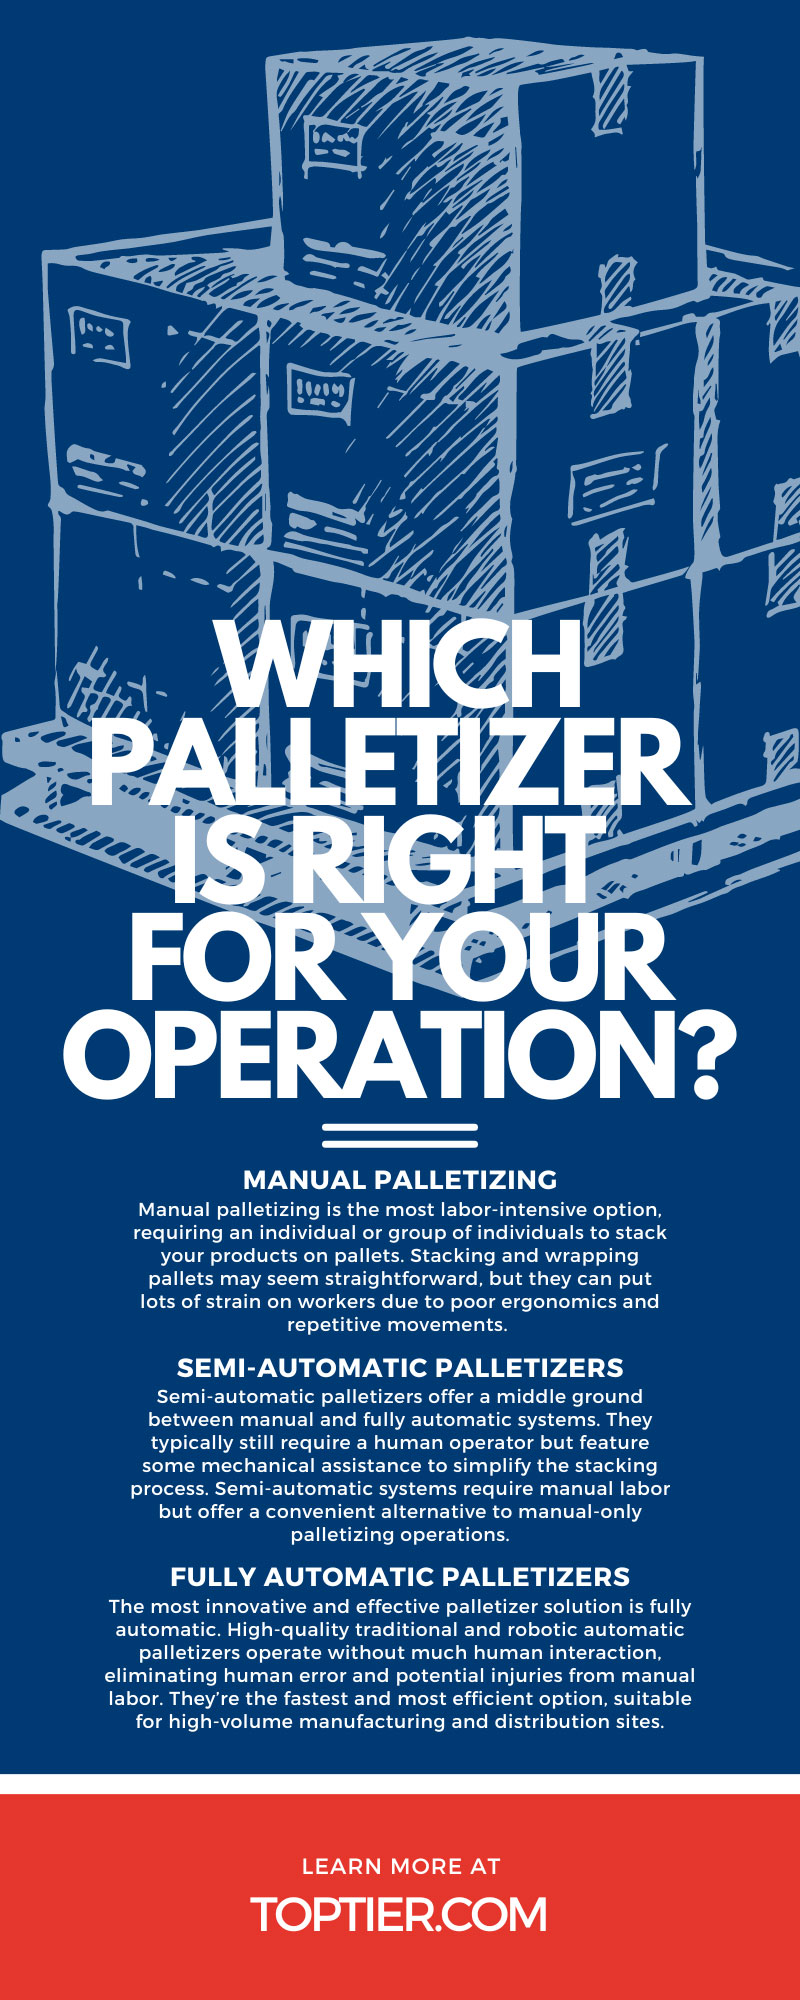 Which Palletizer Is Right for Your Operation?